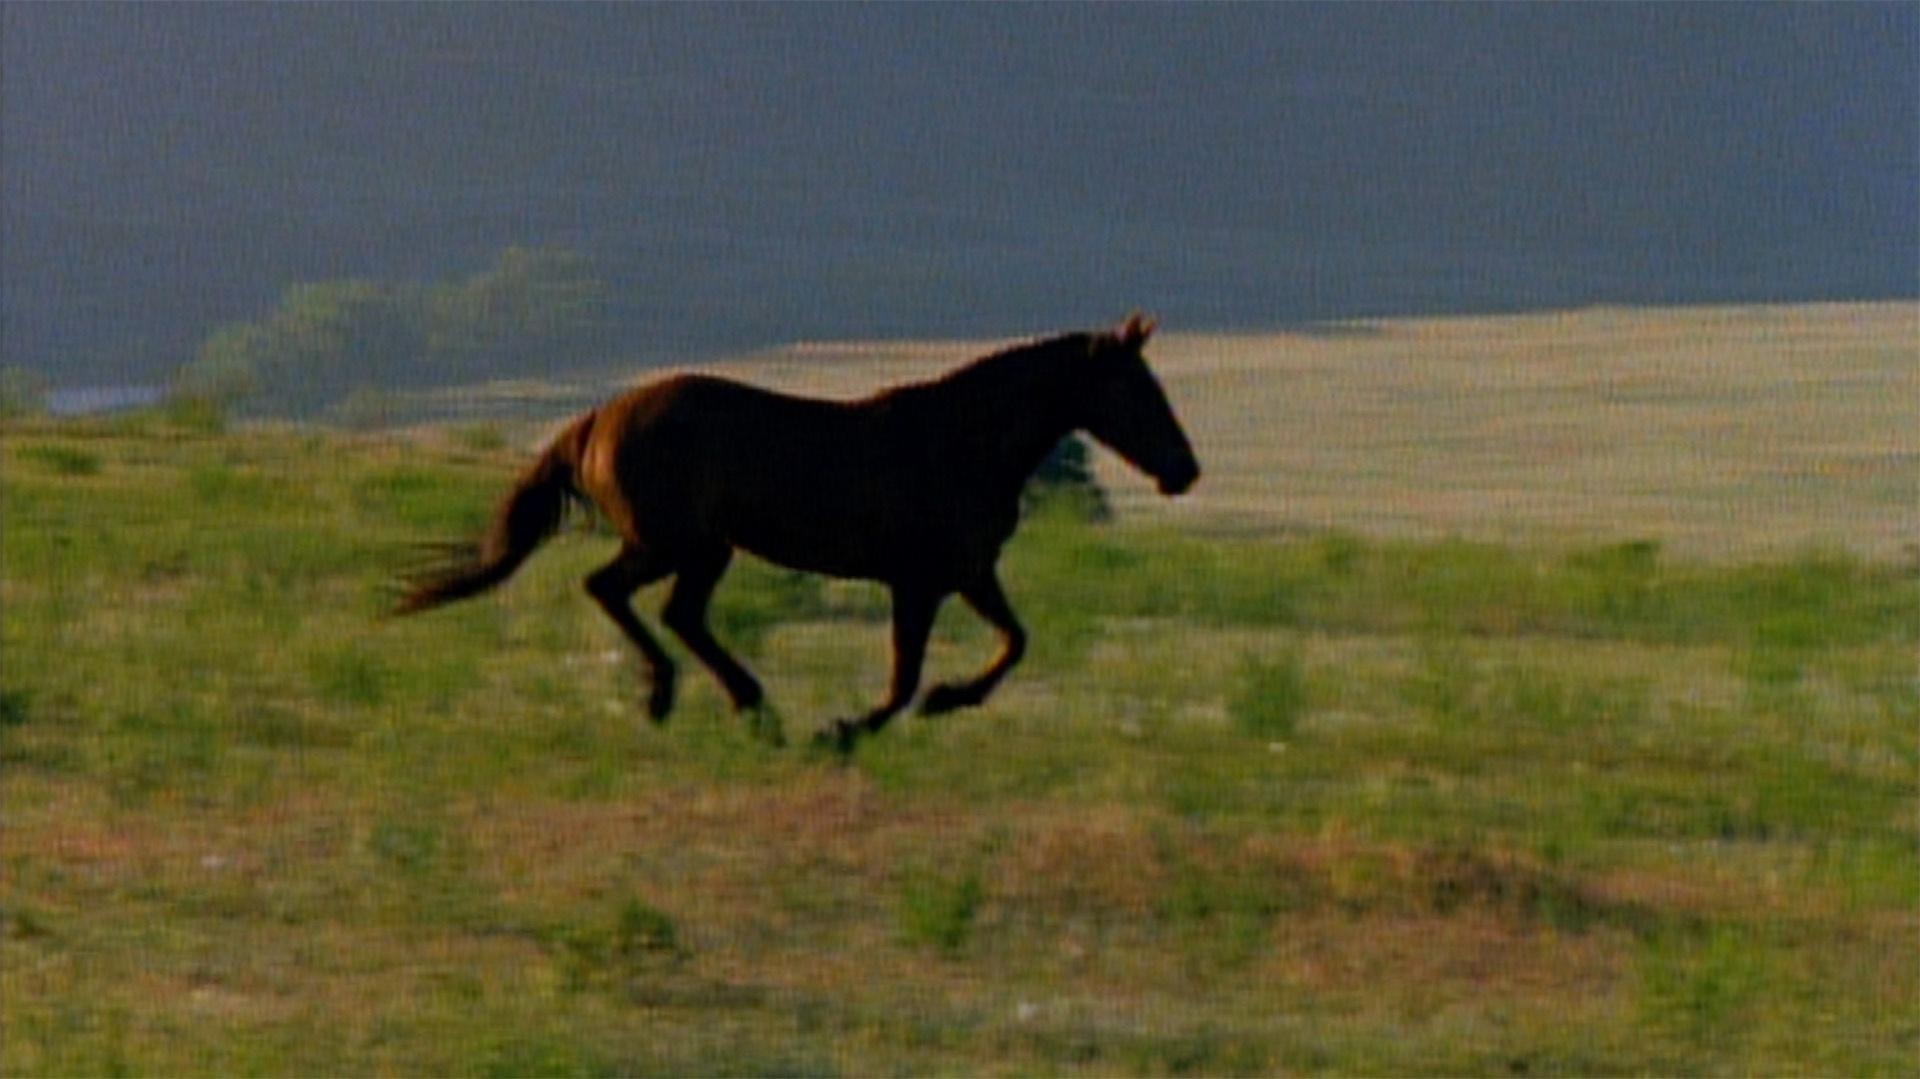 The Role of Horses | The West | PBS1920 x 1079